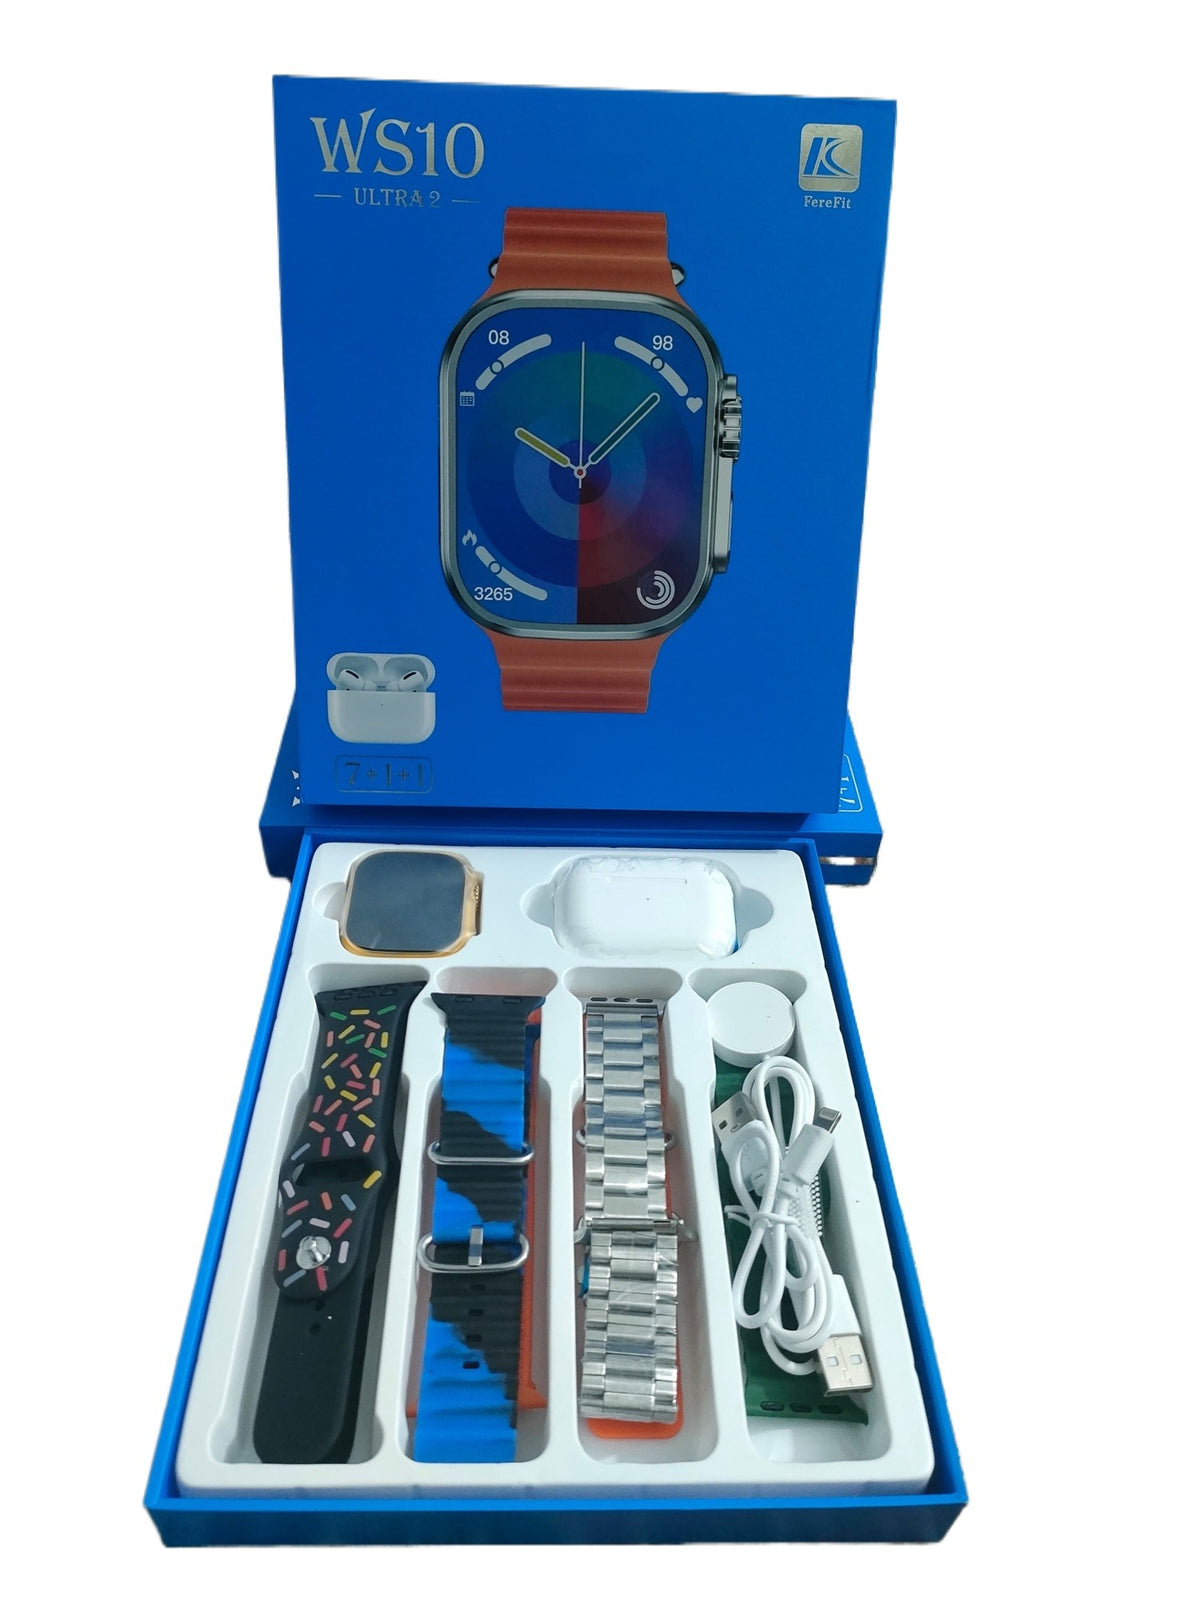 WS10 Ultra 2 Smart Watch with 7 Straps, 1 Watch, and Earbuds